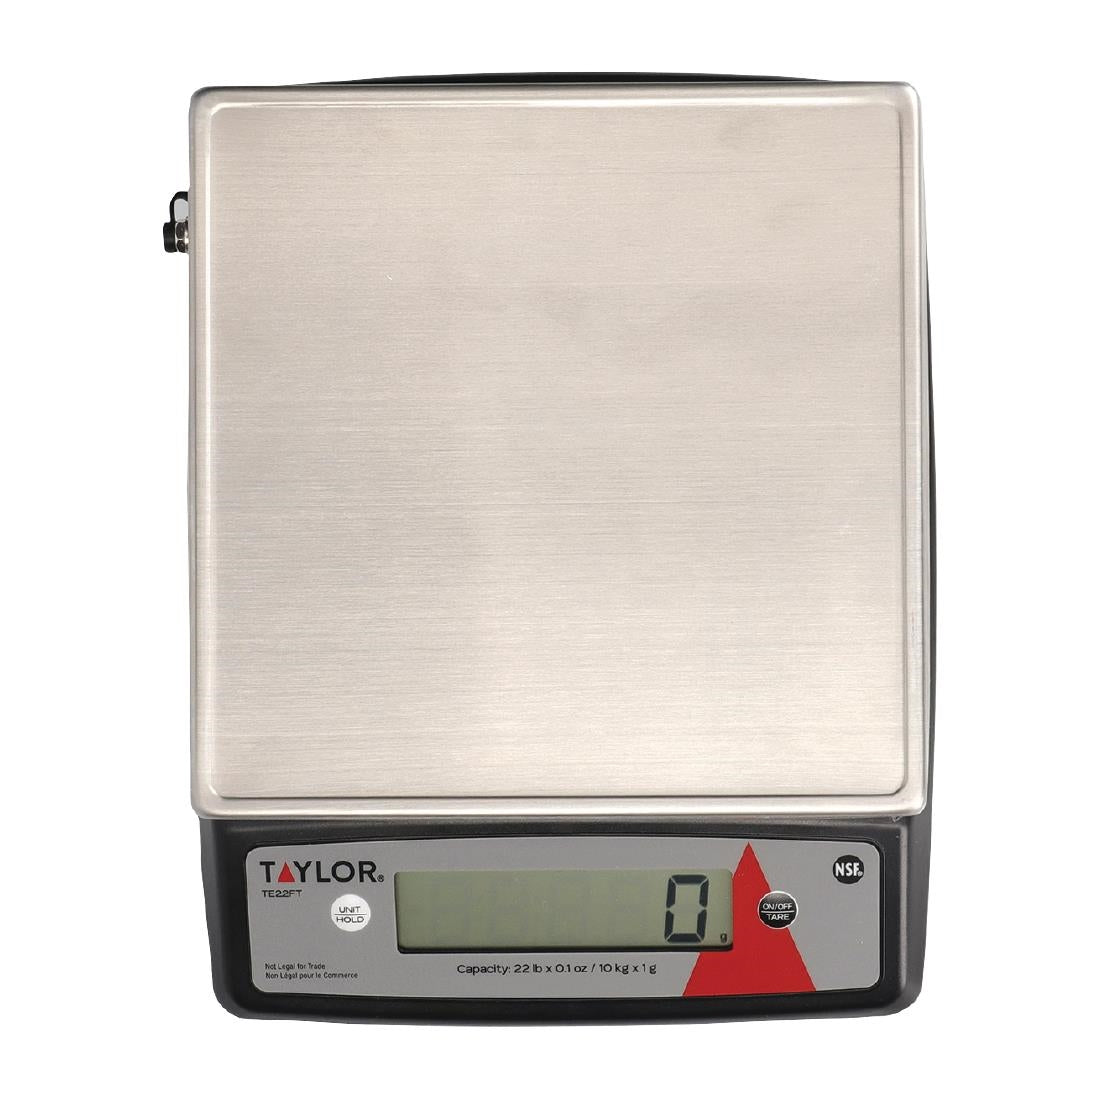 FS593 Taylor Stainless Steel Digital Portion Control Heavy Duty Kitchen Scale 10kg TE22FT JD Catering Equipment Solutions Ltd